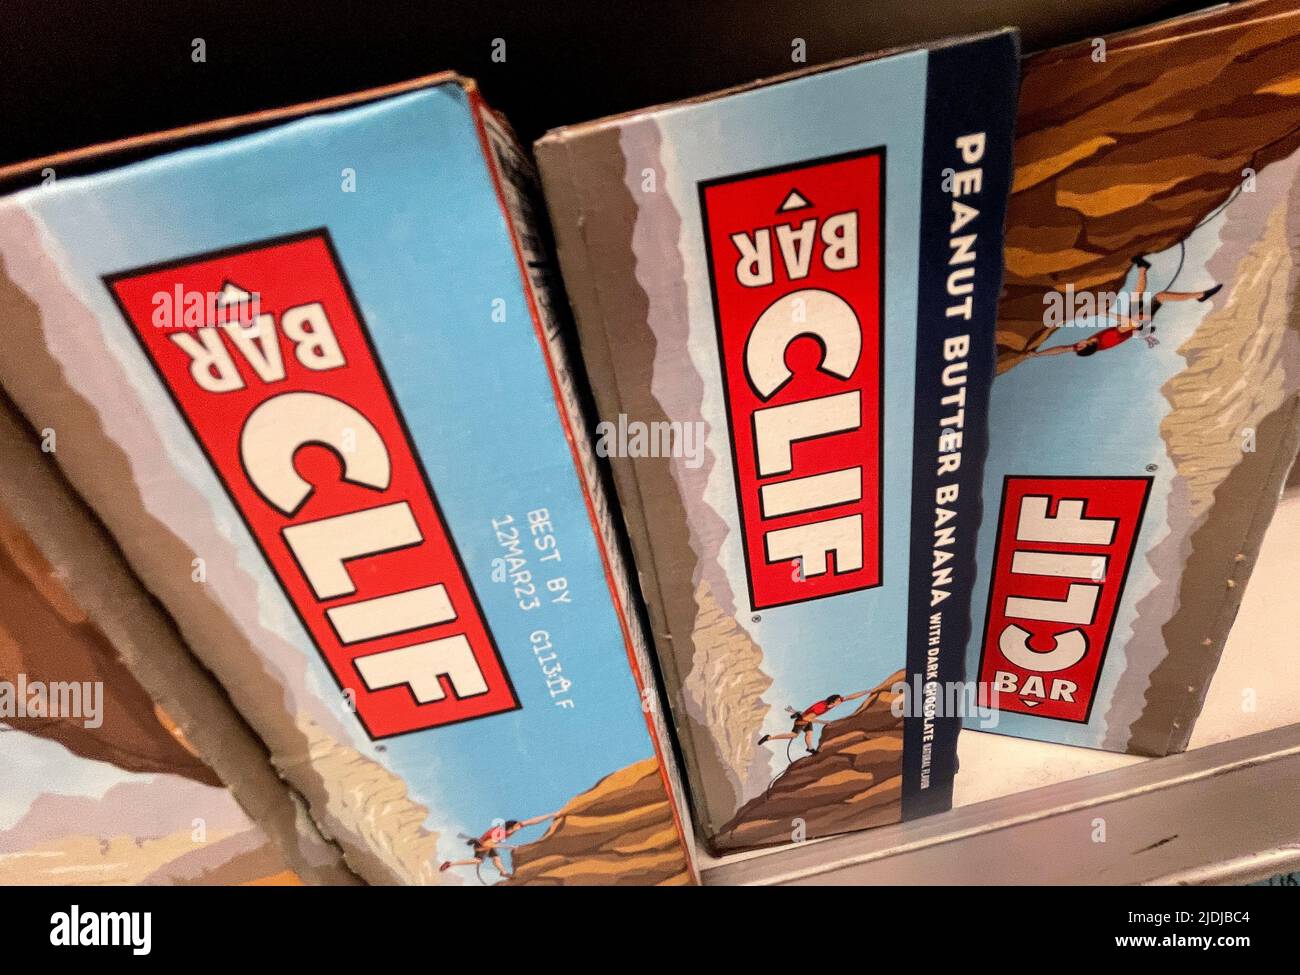 Clif Bar products are pictured in a market after Mondelez International Inc, (MDLZ.O) said on Monday it will buy energy bar maker Clif Bar & Company for $2.9 billion to expand its global snack bar business, in New York, U.S., June 21, 2022. REUTERS/Mike Segar Stock Photo